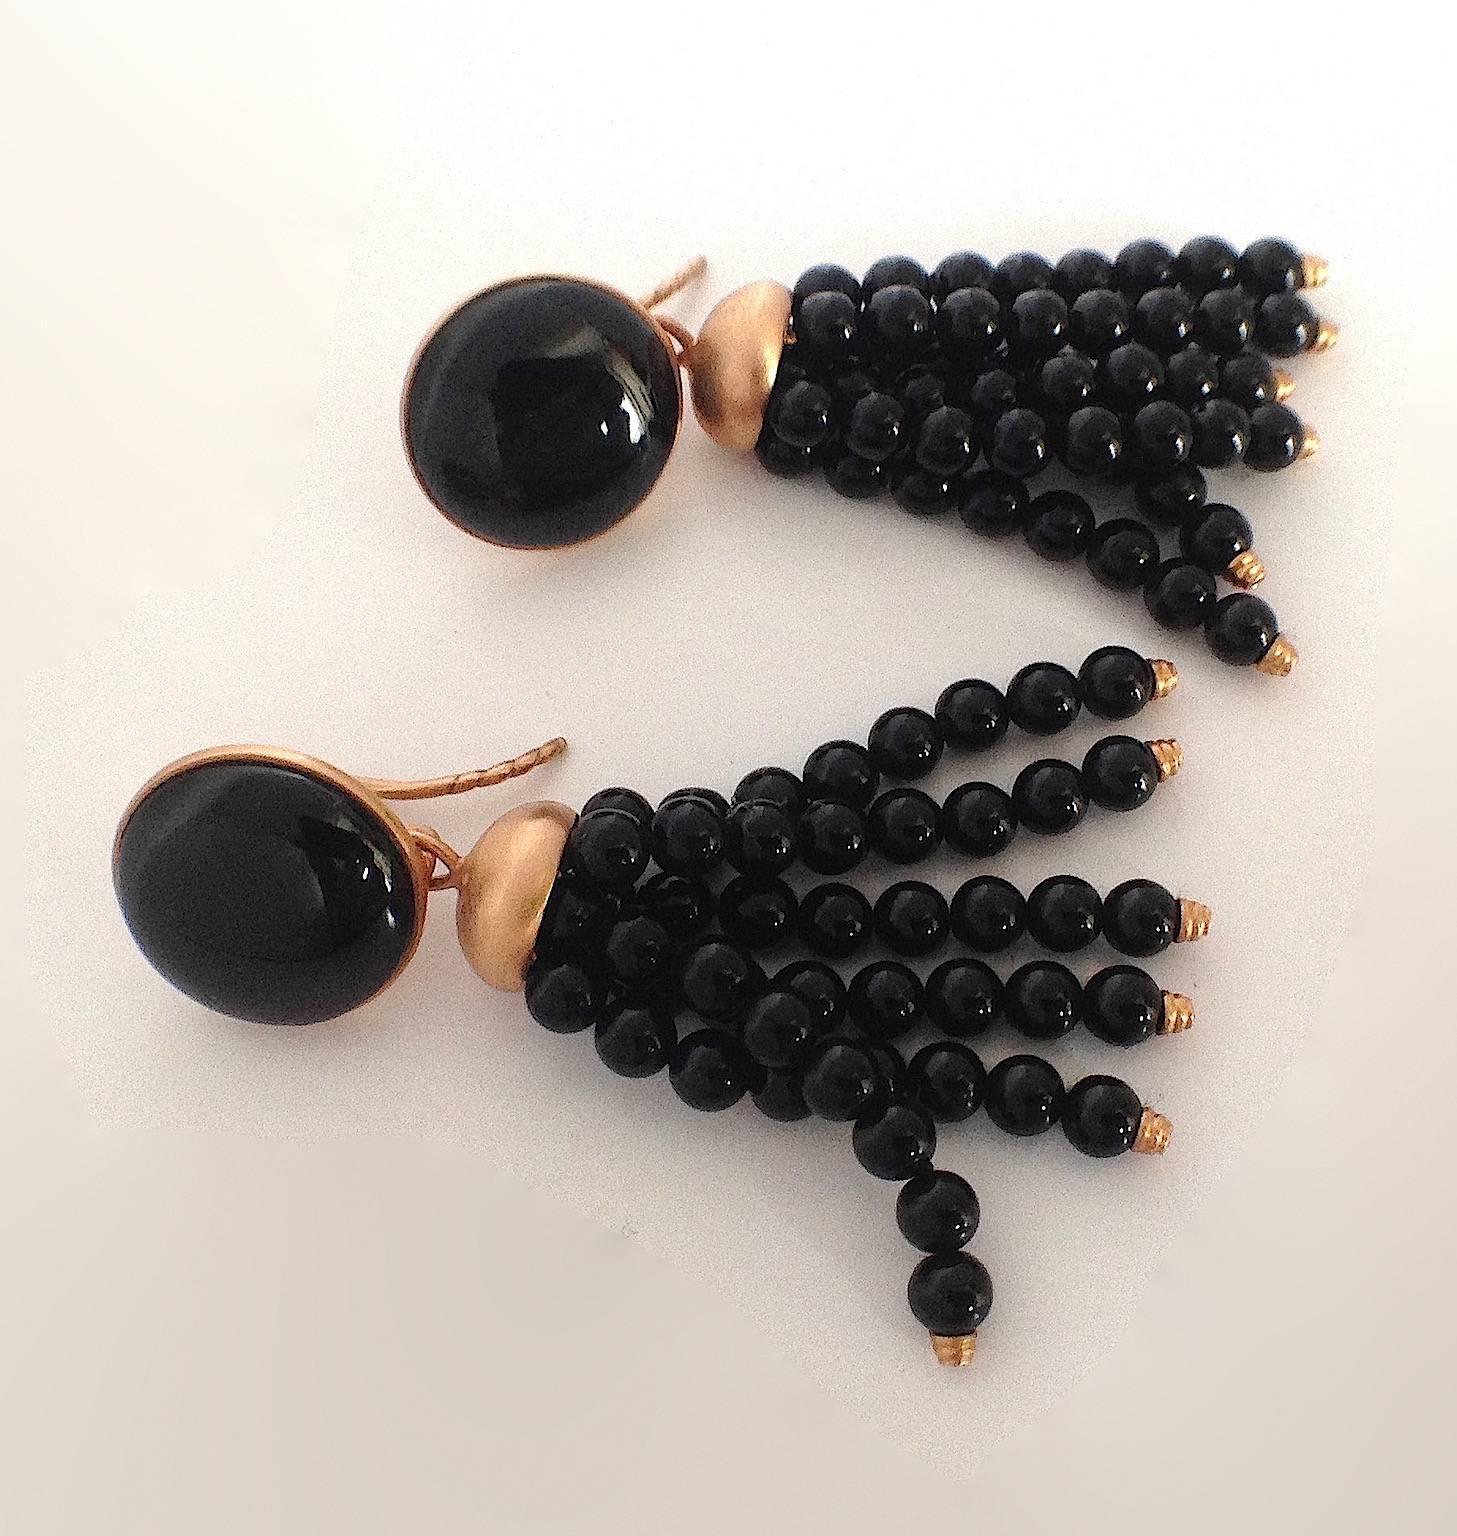 These Earrings have two studs in black jade of 16mm diameter. You can remove the black coral tassels from the studs to create a different effect, for each occasion when you wear the earrings. The gold is unpolished red gold. The inspiration for the